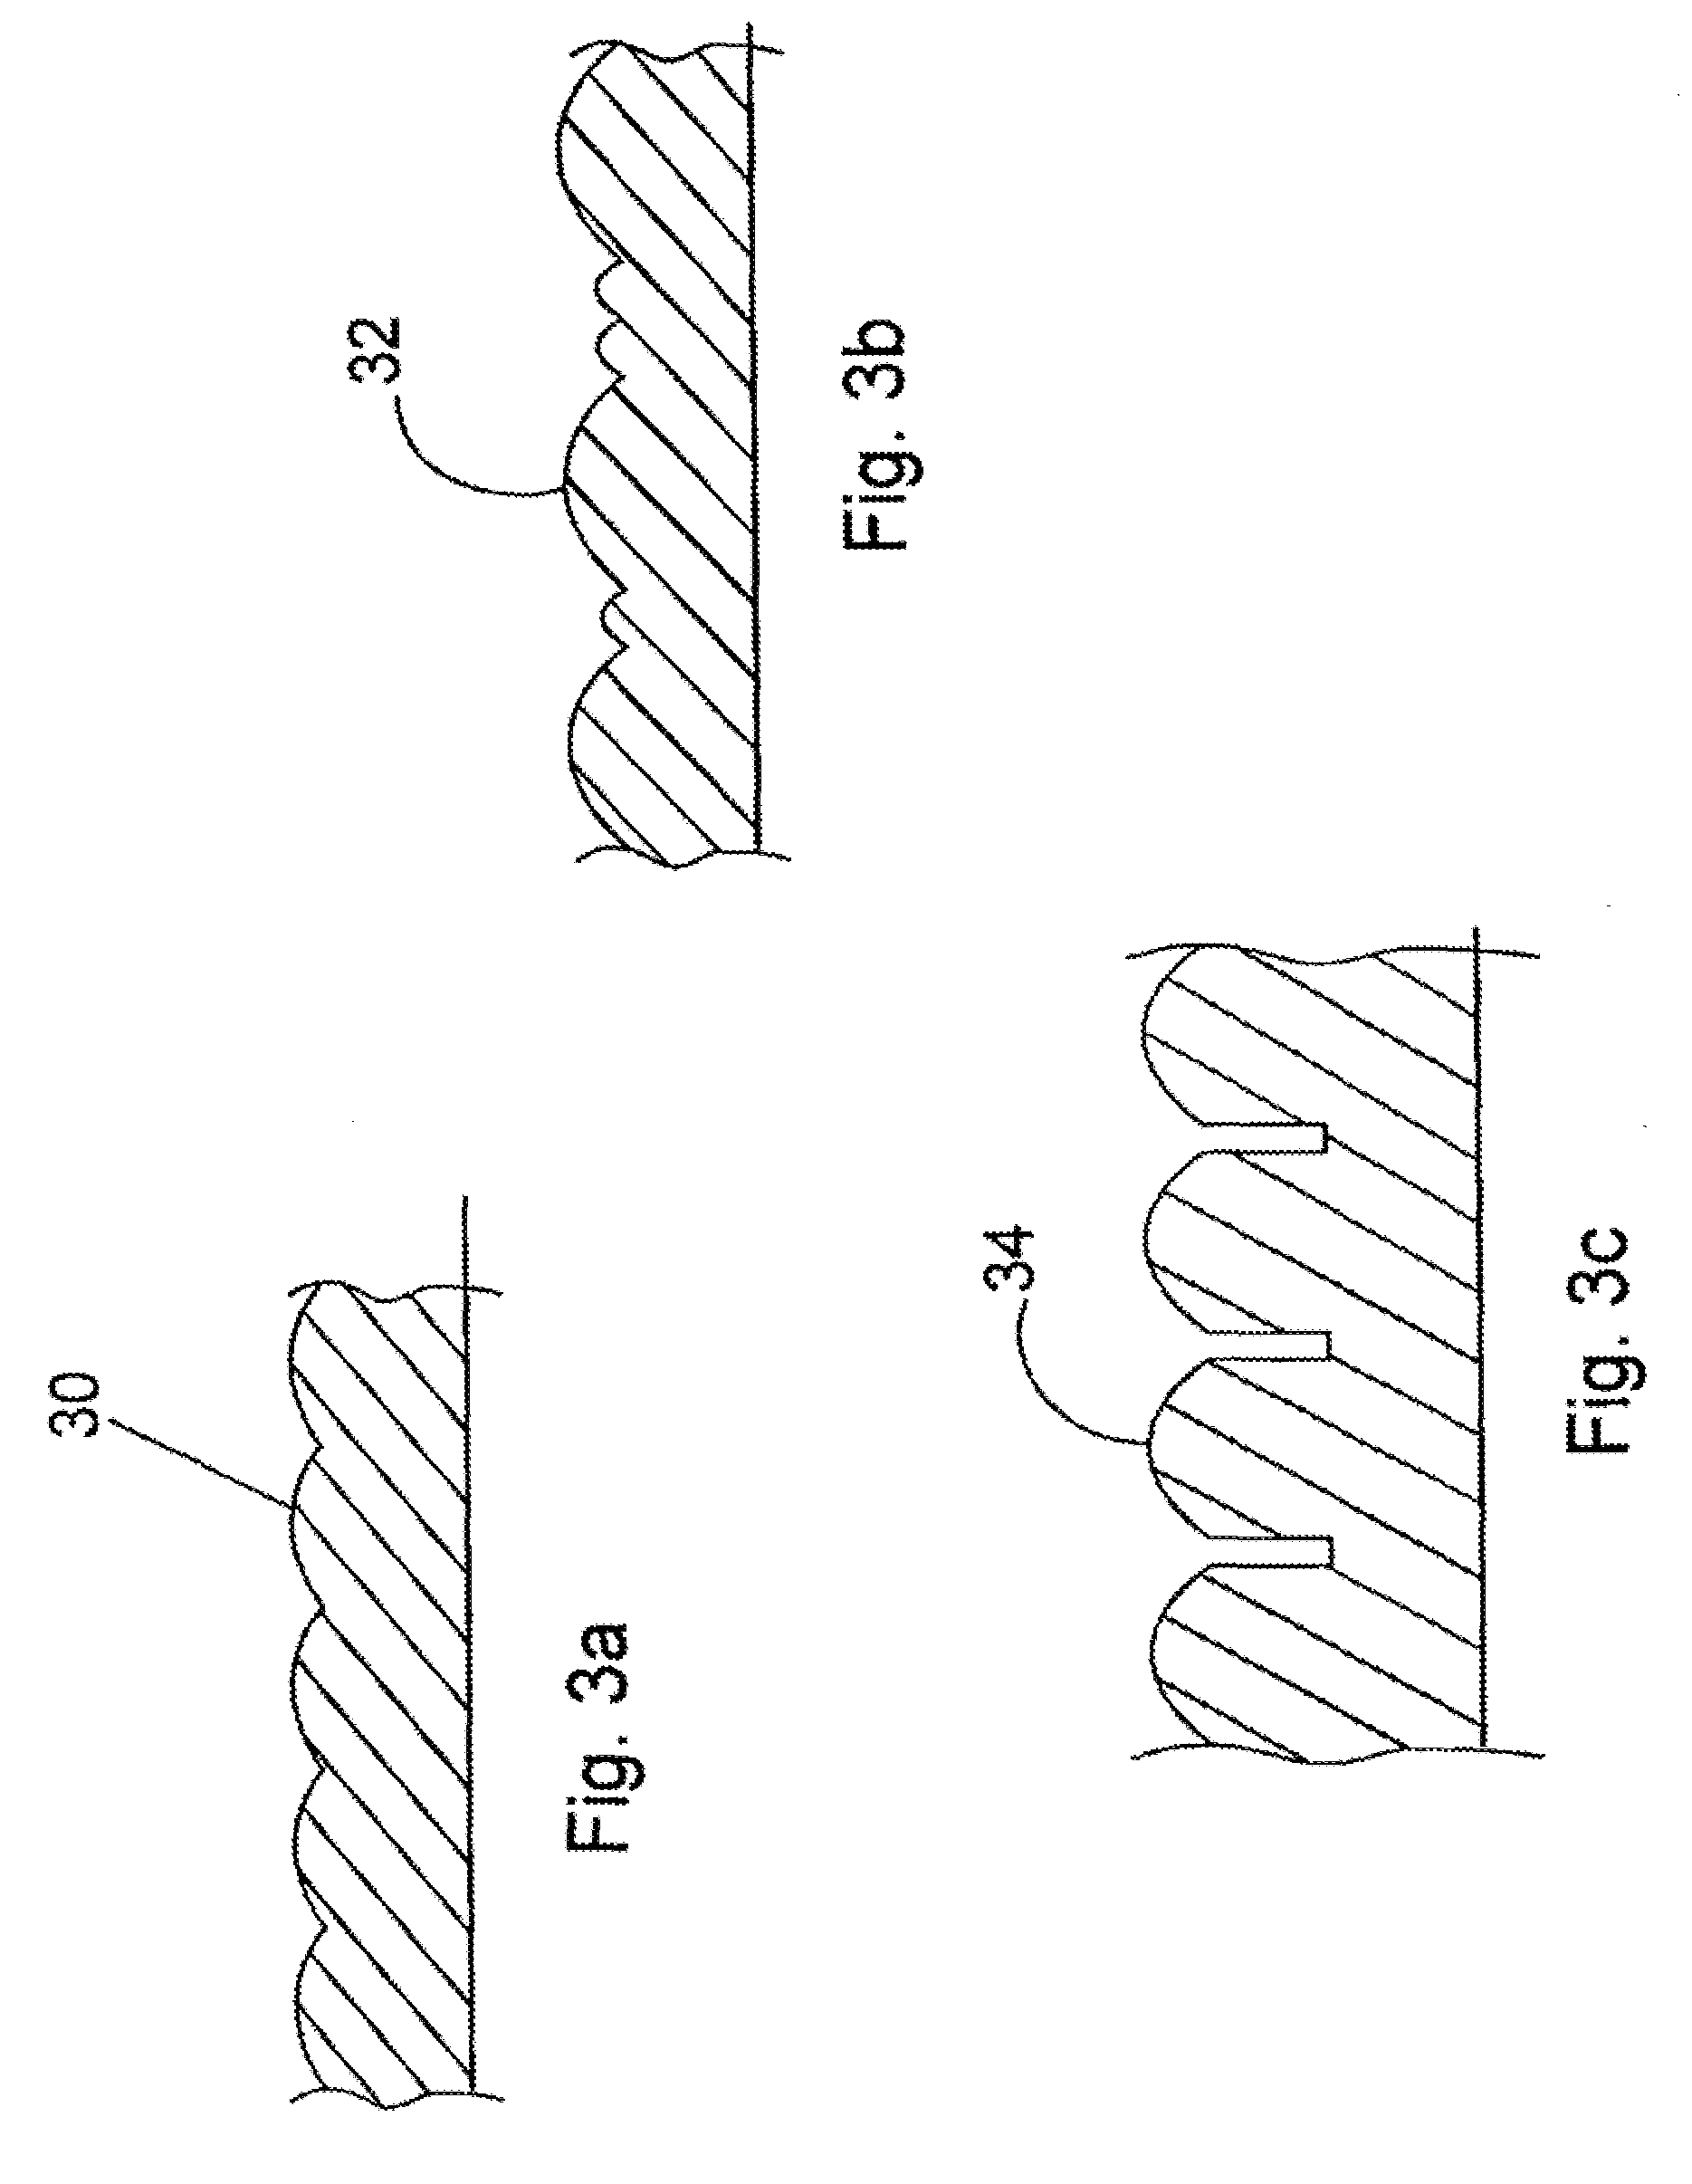 Reactor with heated and textured electrodes and surfaces